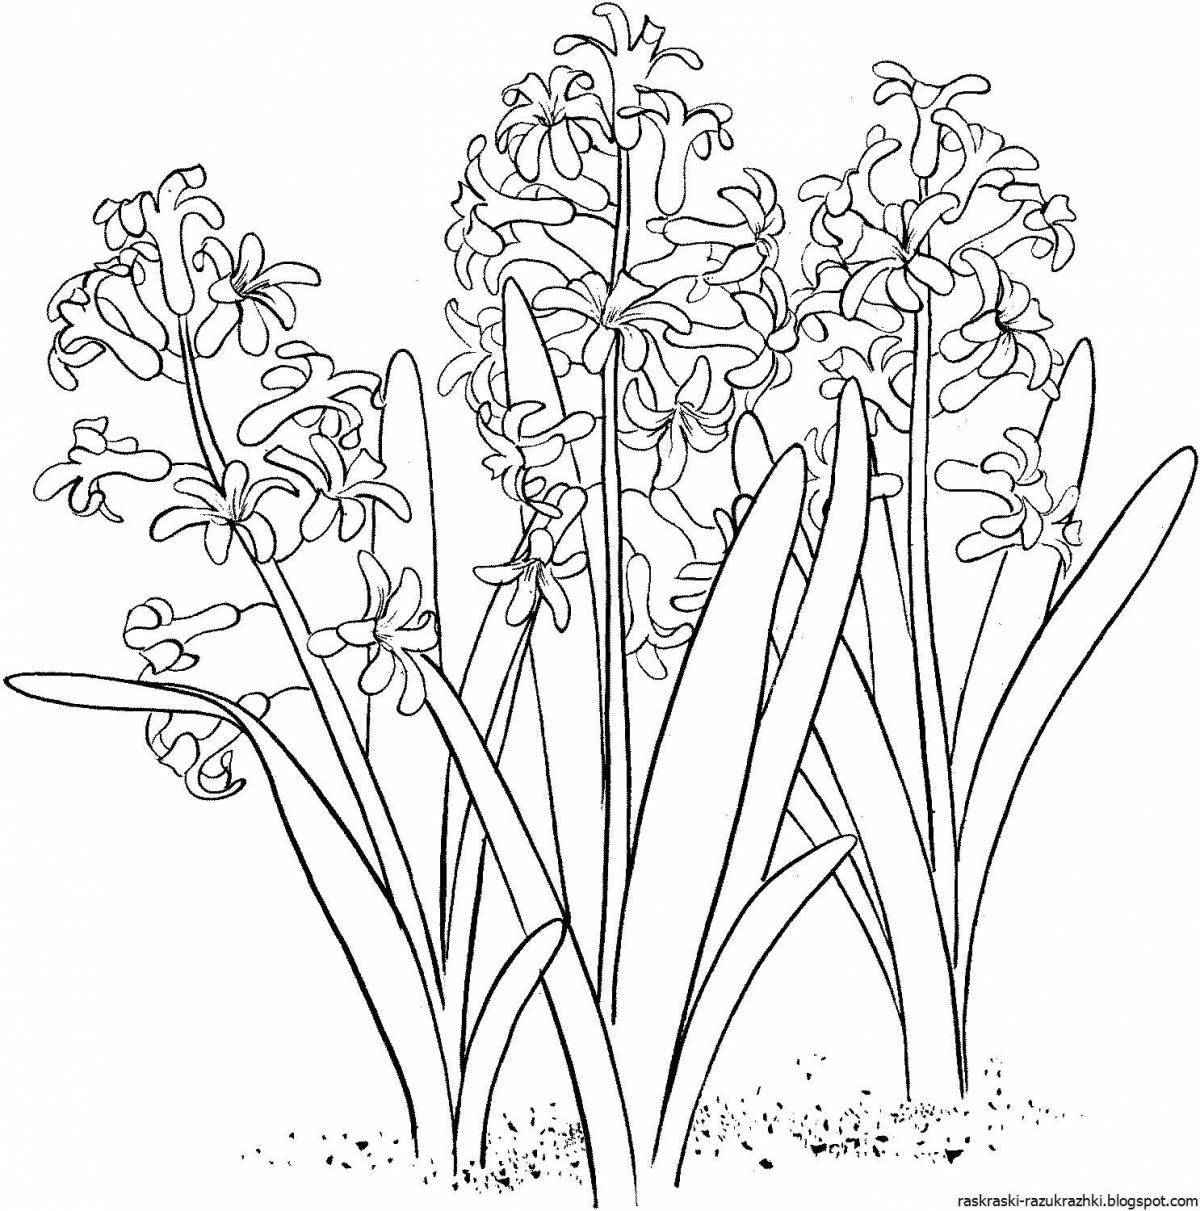 Delightful spring flowers coloring book